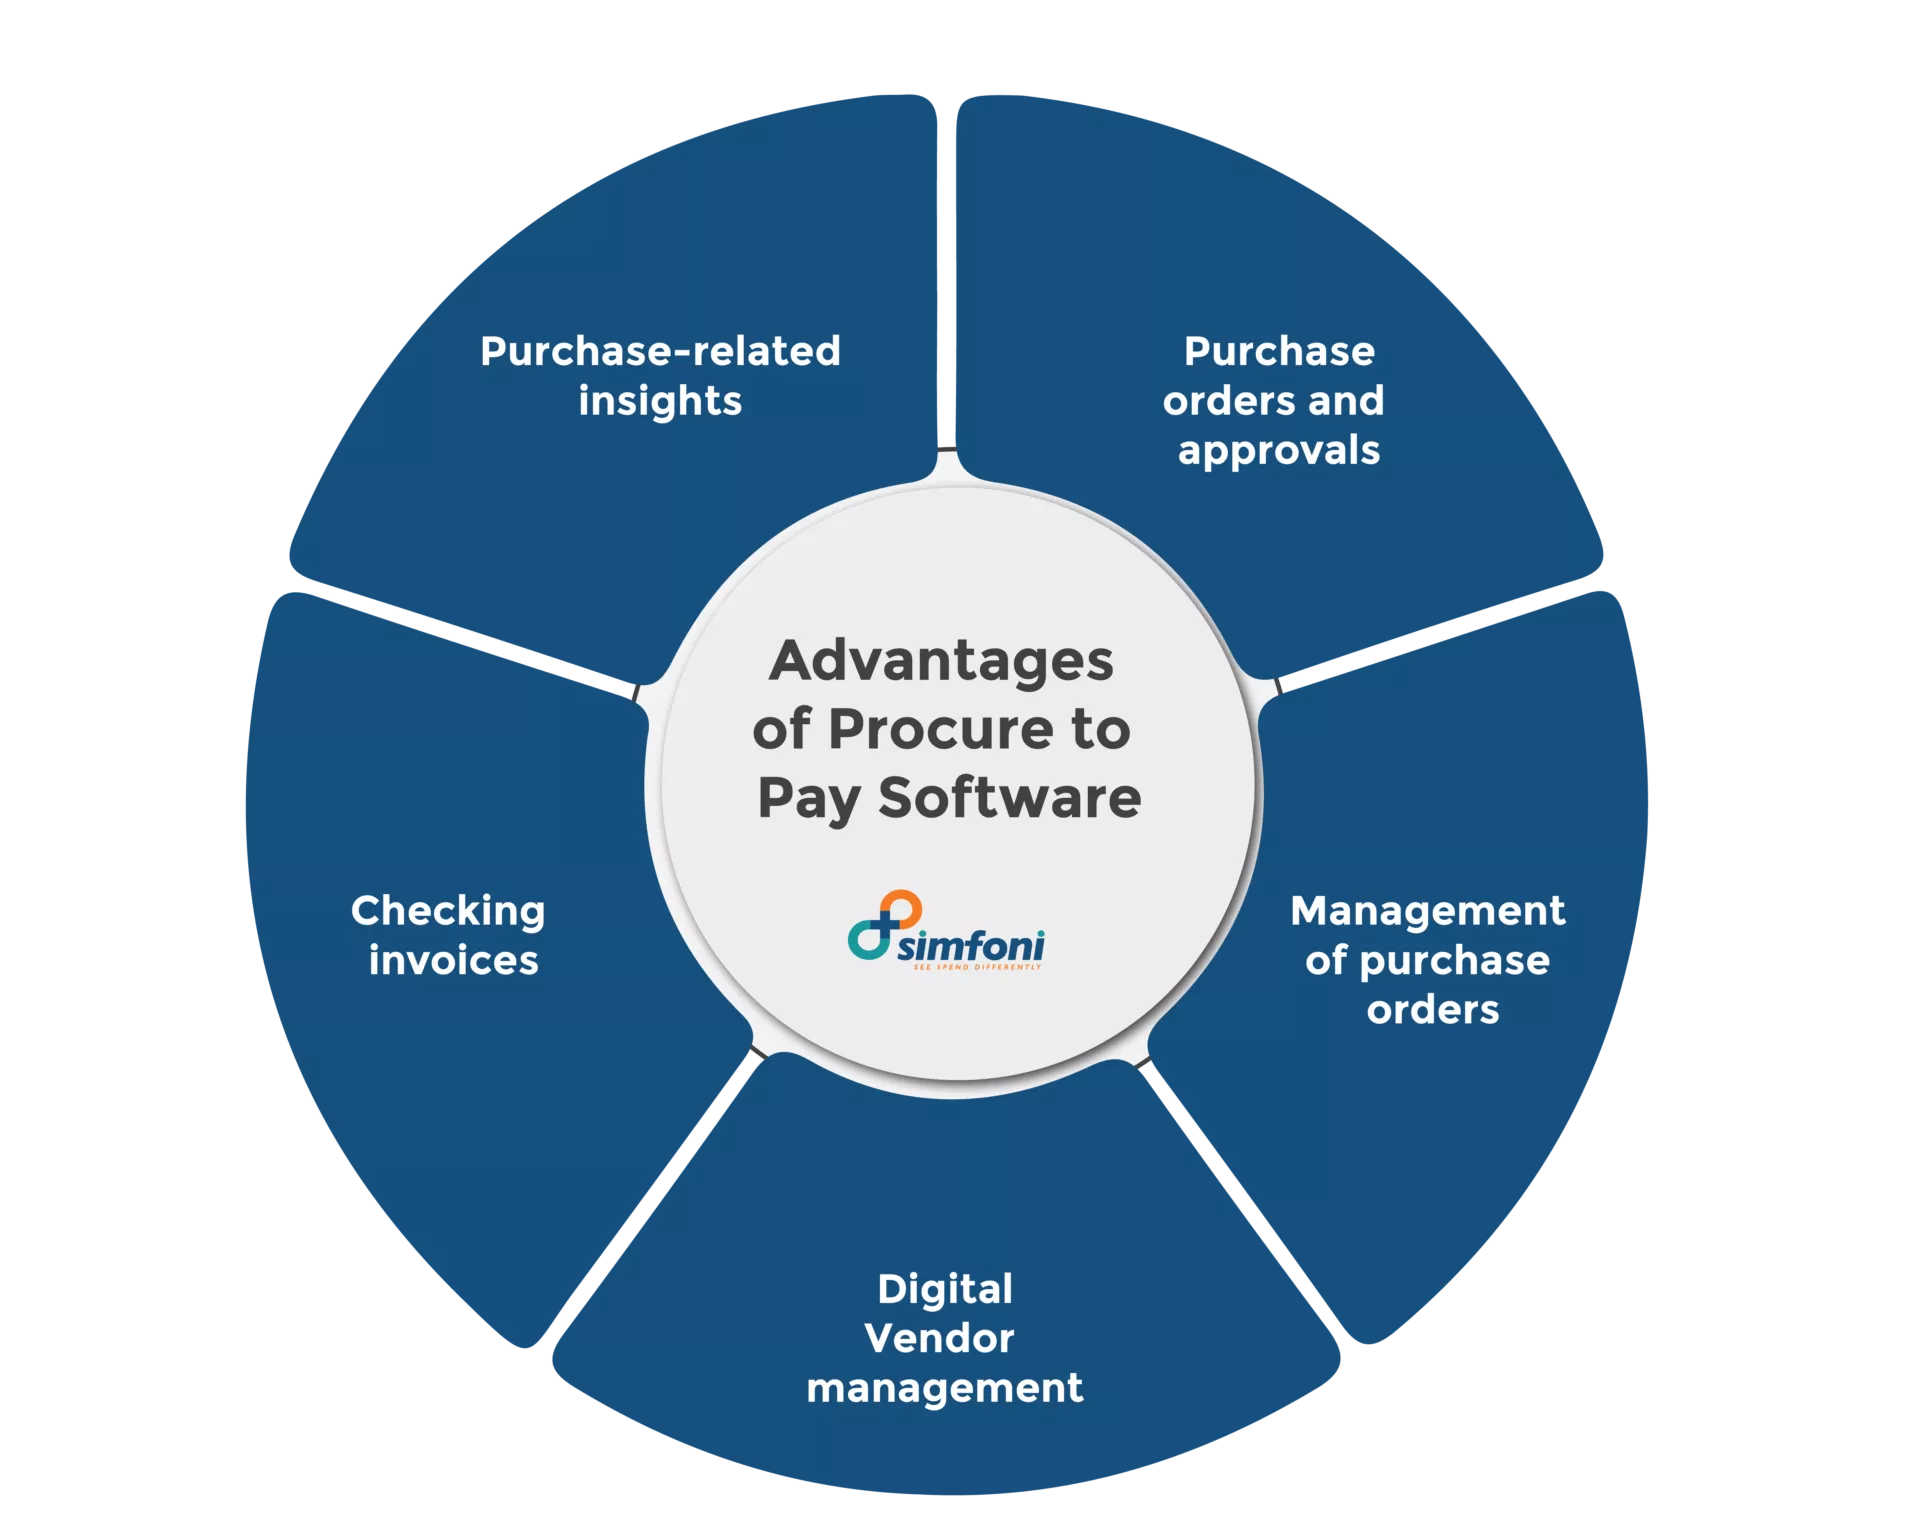 Advantages of Procure to Pay Software